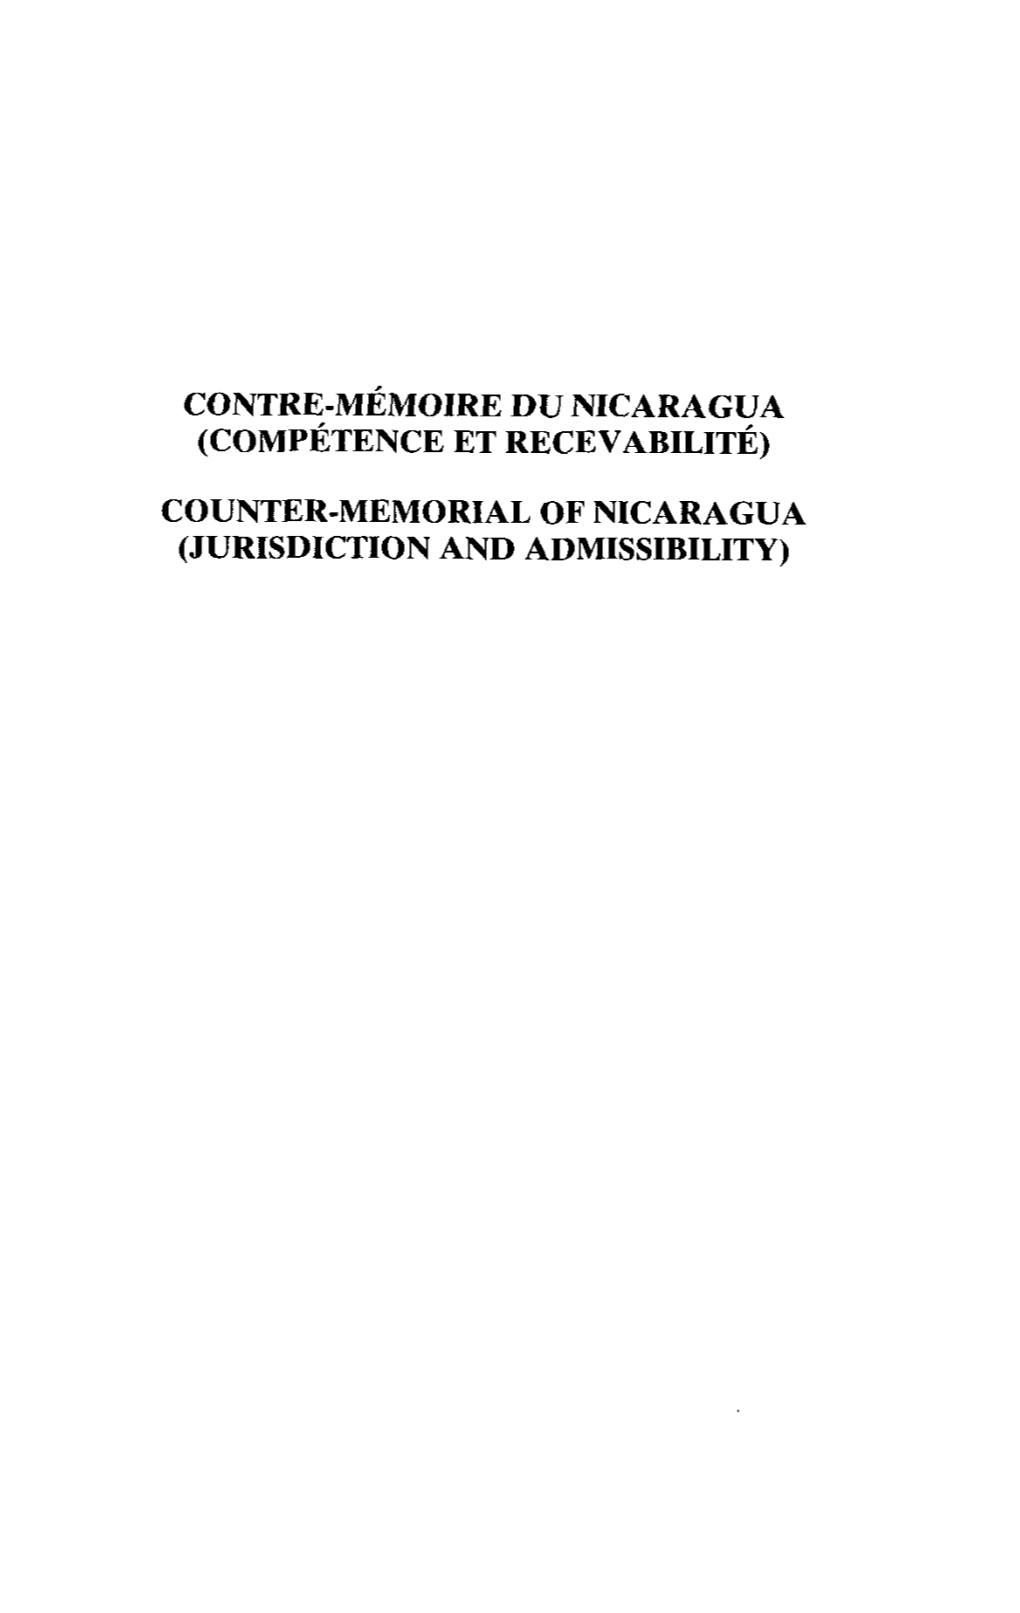 COUNTER-MEMORIAL of NICARAGUA (JURISDICTION and ADMISSIBILITY) Volume 1